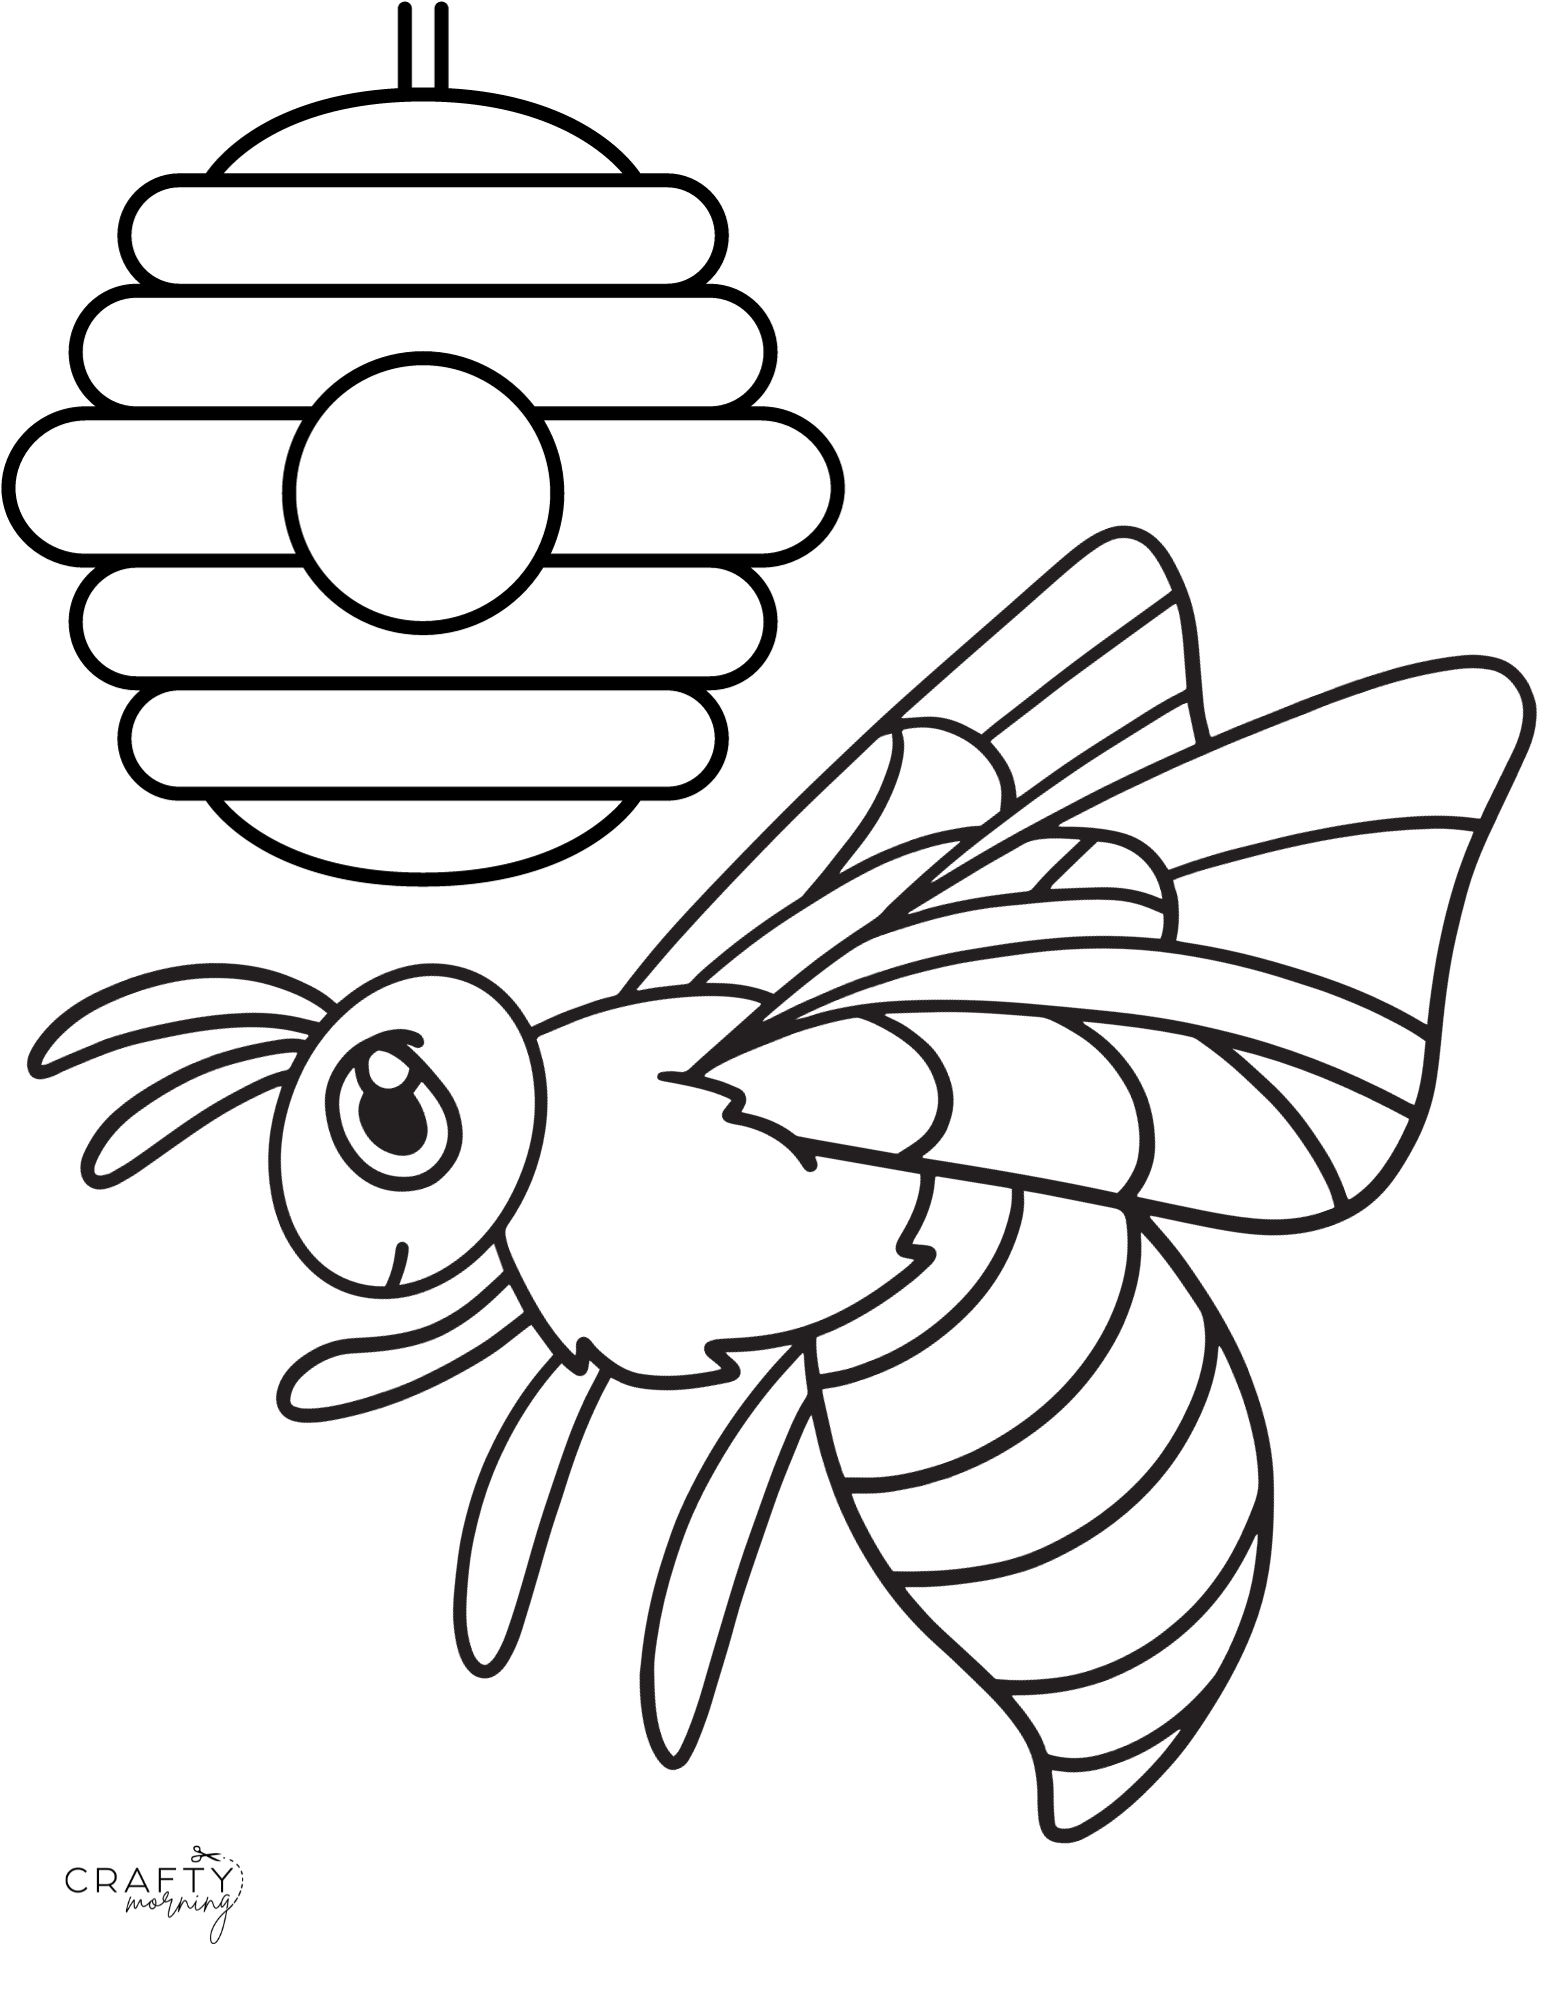 Bee coloring pages to print